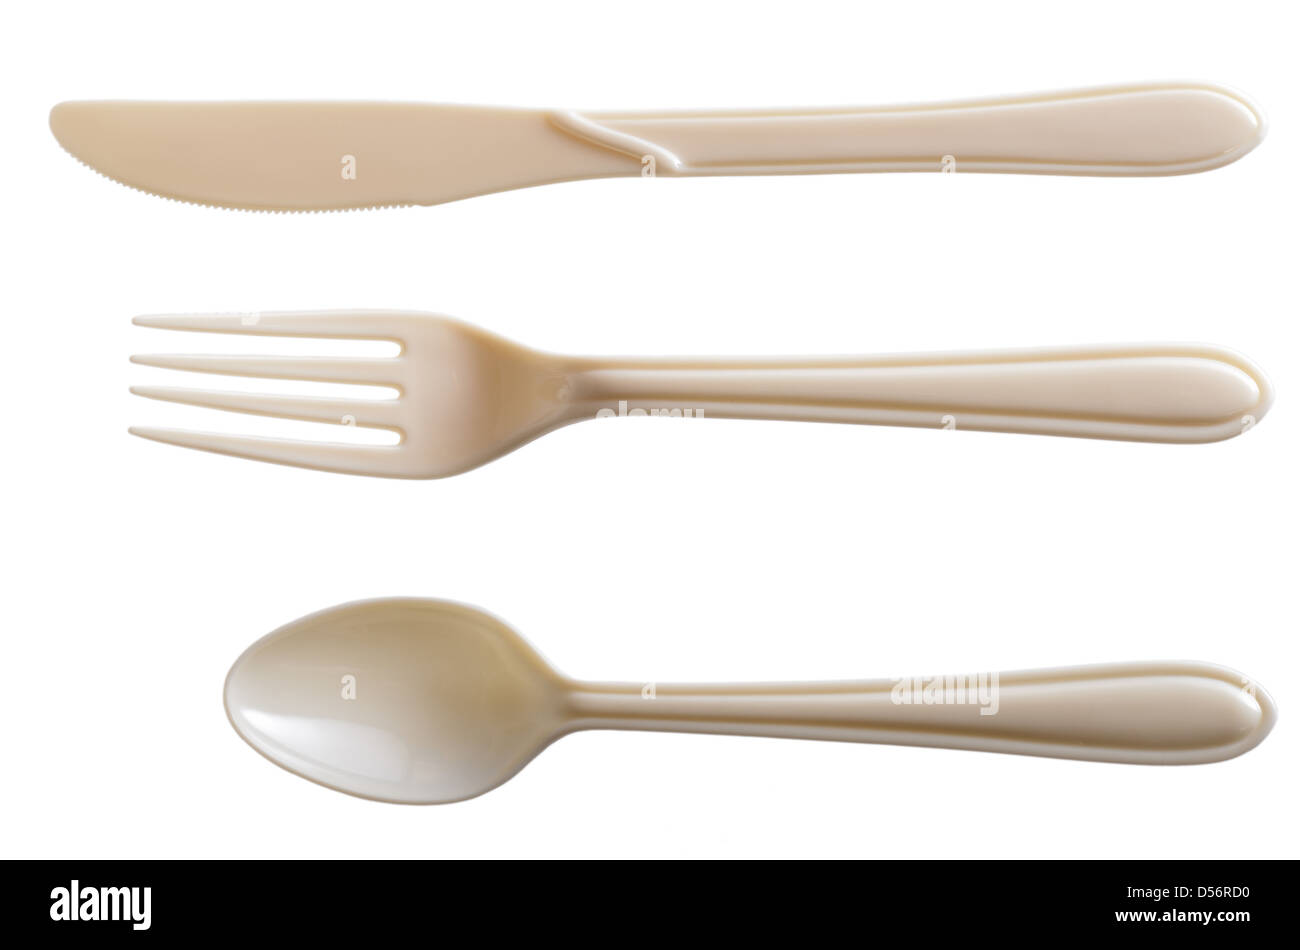 off white set off plastic knife, spoon and fork isolated on white background Stock Photo